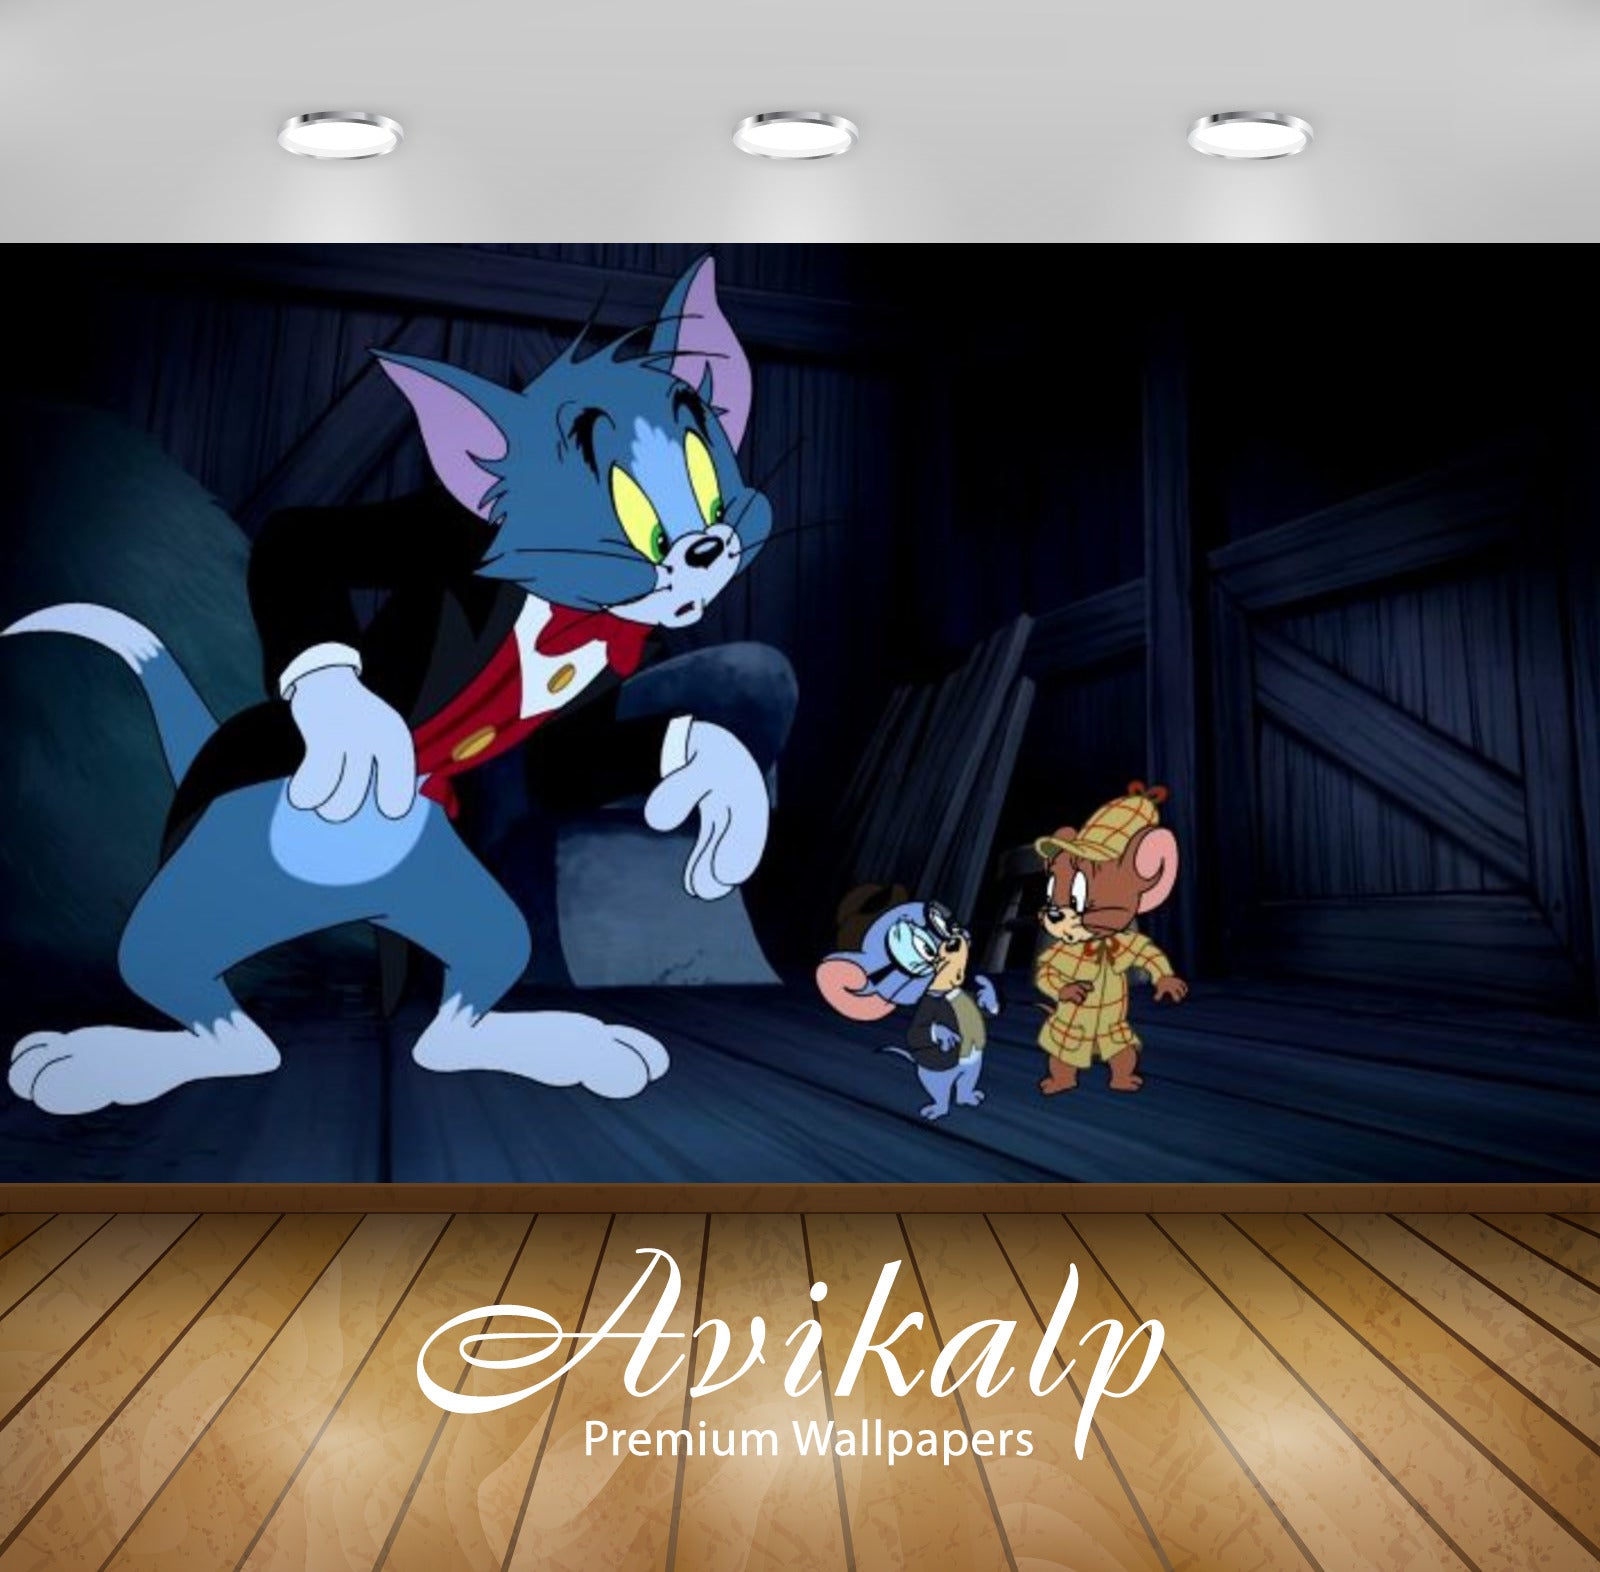 Avikalp Exclusive Awi2270 Tom And Jerry Meet Sherlock Holmes Full HD Wallpapers for Living room, Hal